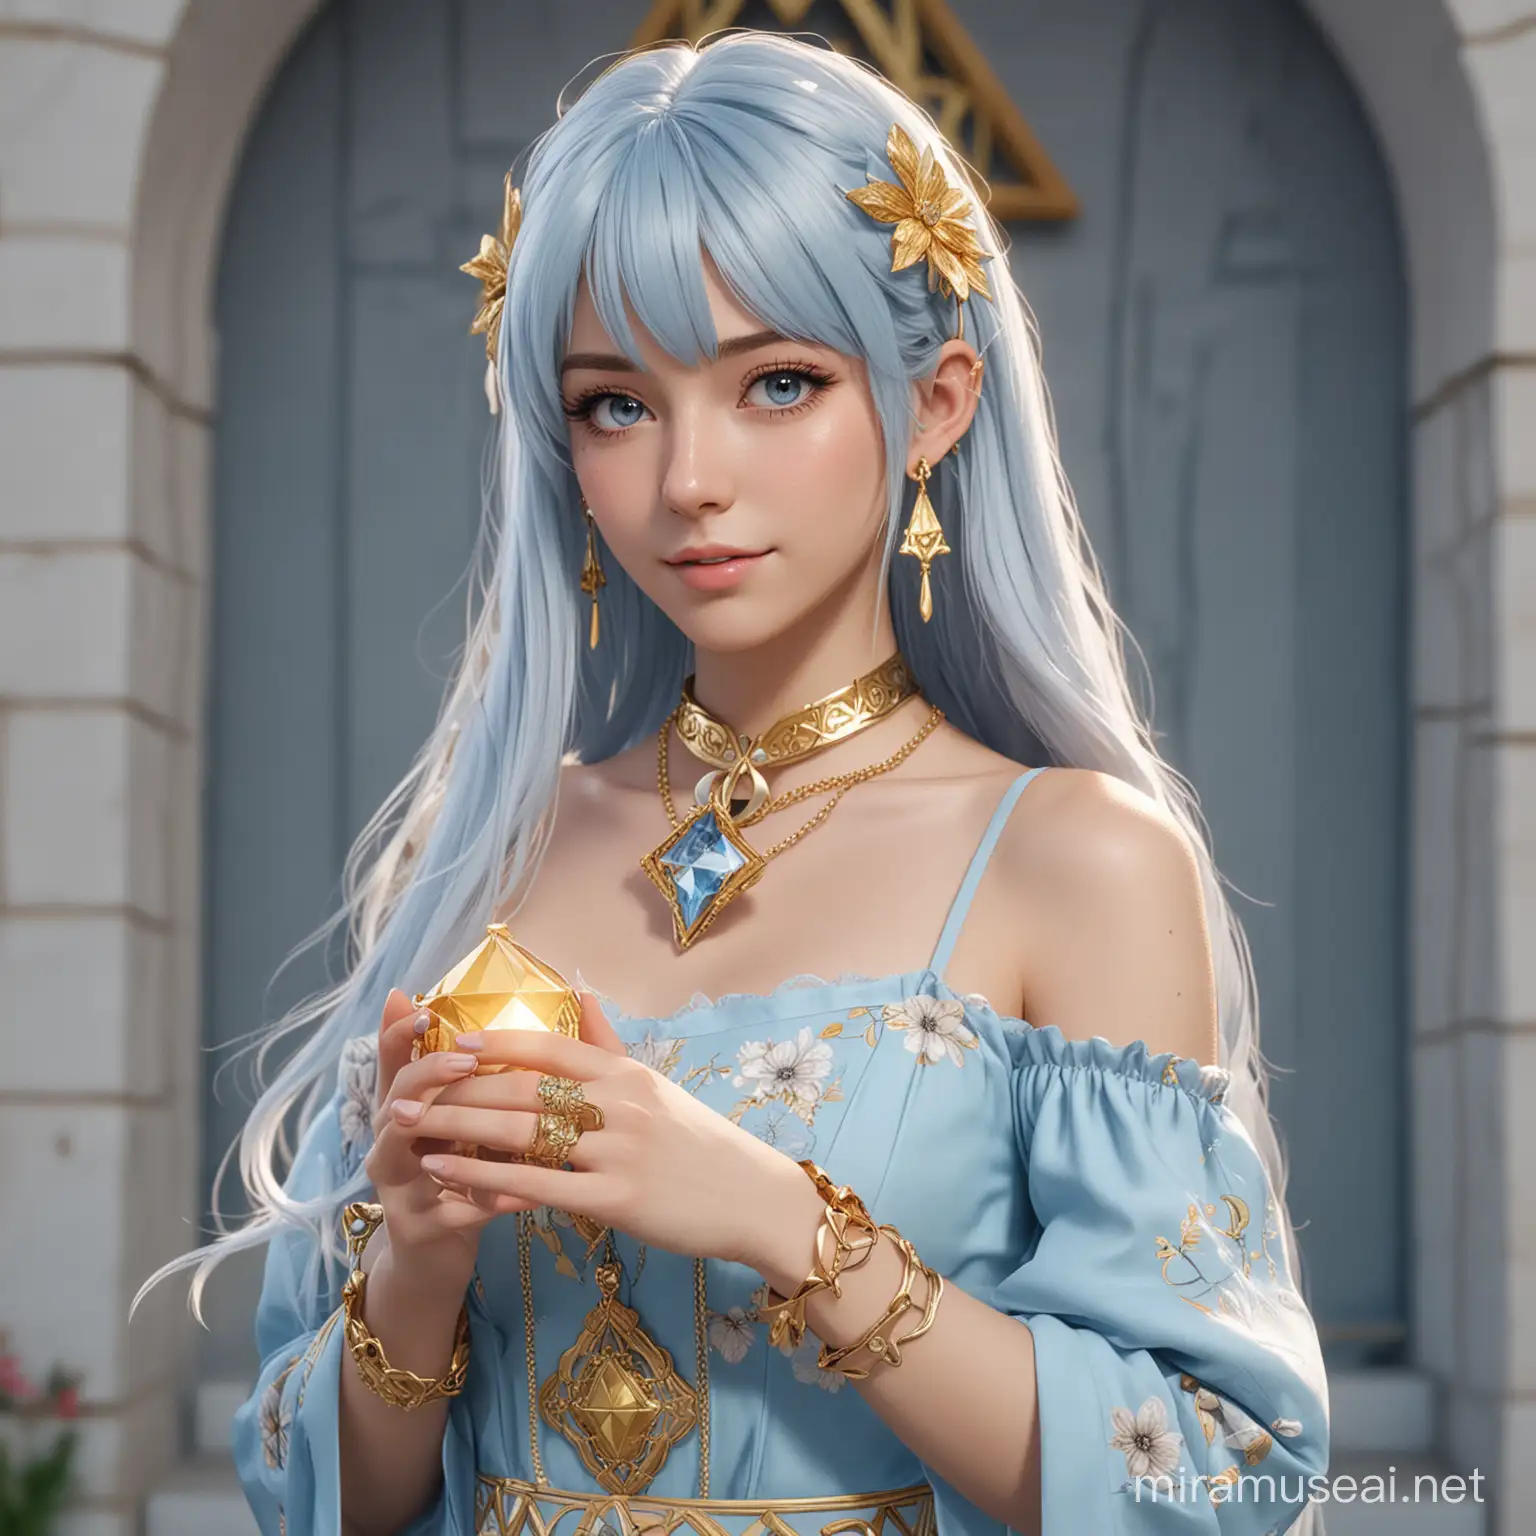 Faruzan from Genshin Impact, long pale blue hair with gold clips, bangs, pale blue eyes, pale blue-gray dress with floral and geometric appliques accurate to in-game appearance, square bangle bracelets, holding a small pyramidal glowing device and looking at the viewer